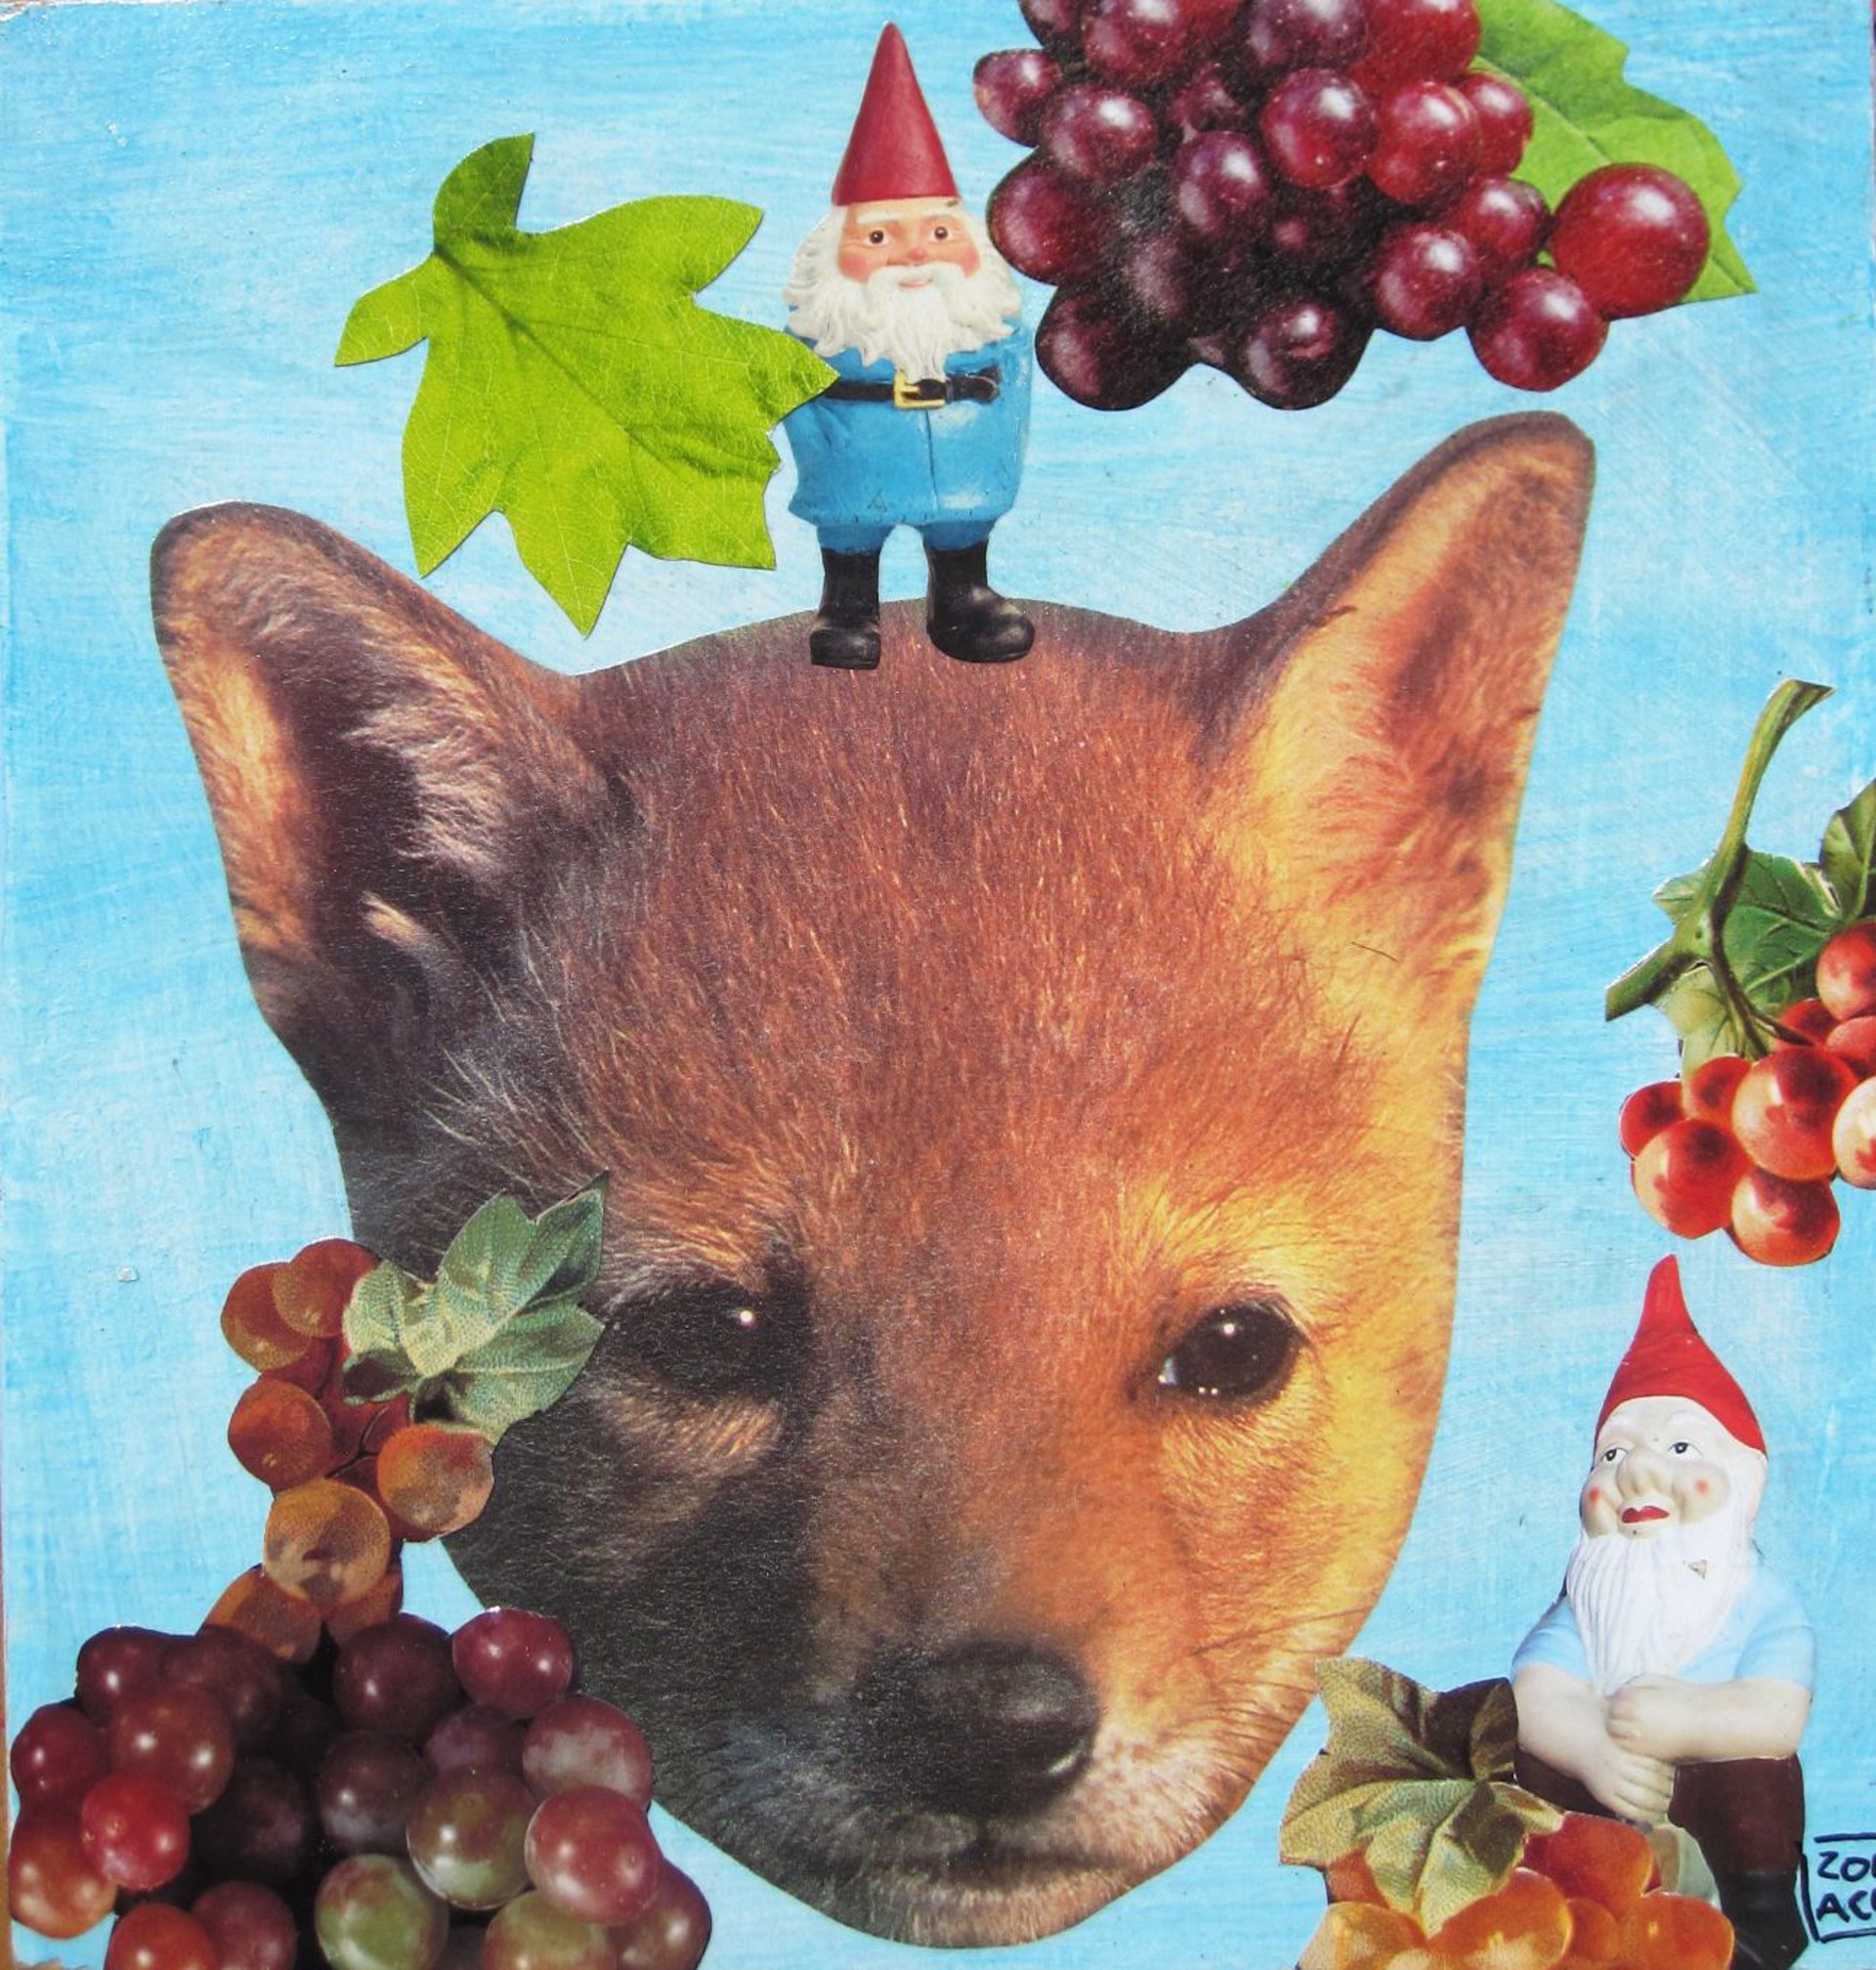 Fox with Grapes by Zoa Ace